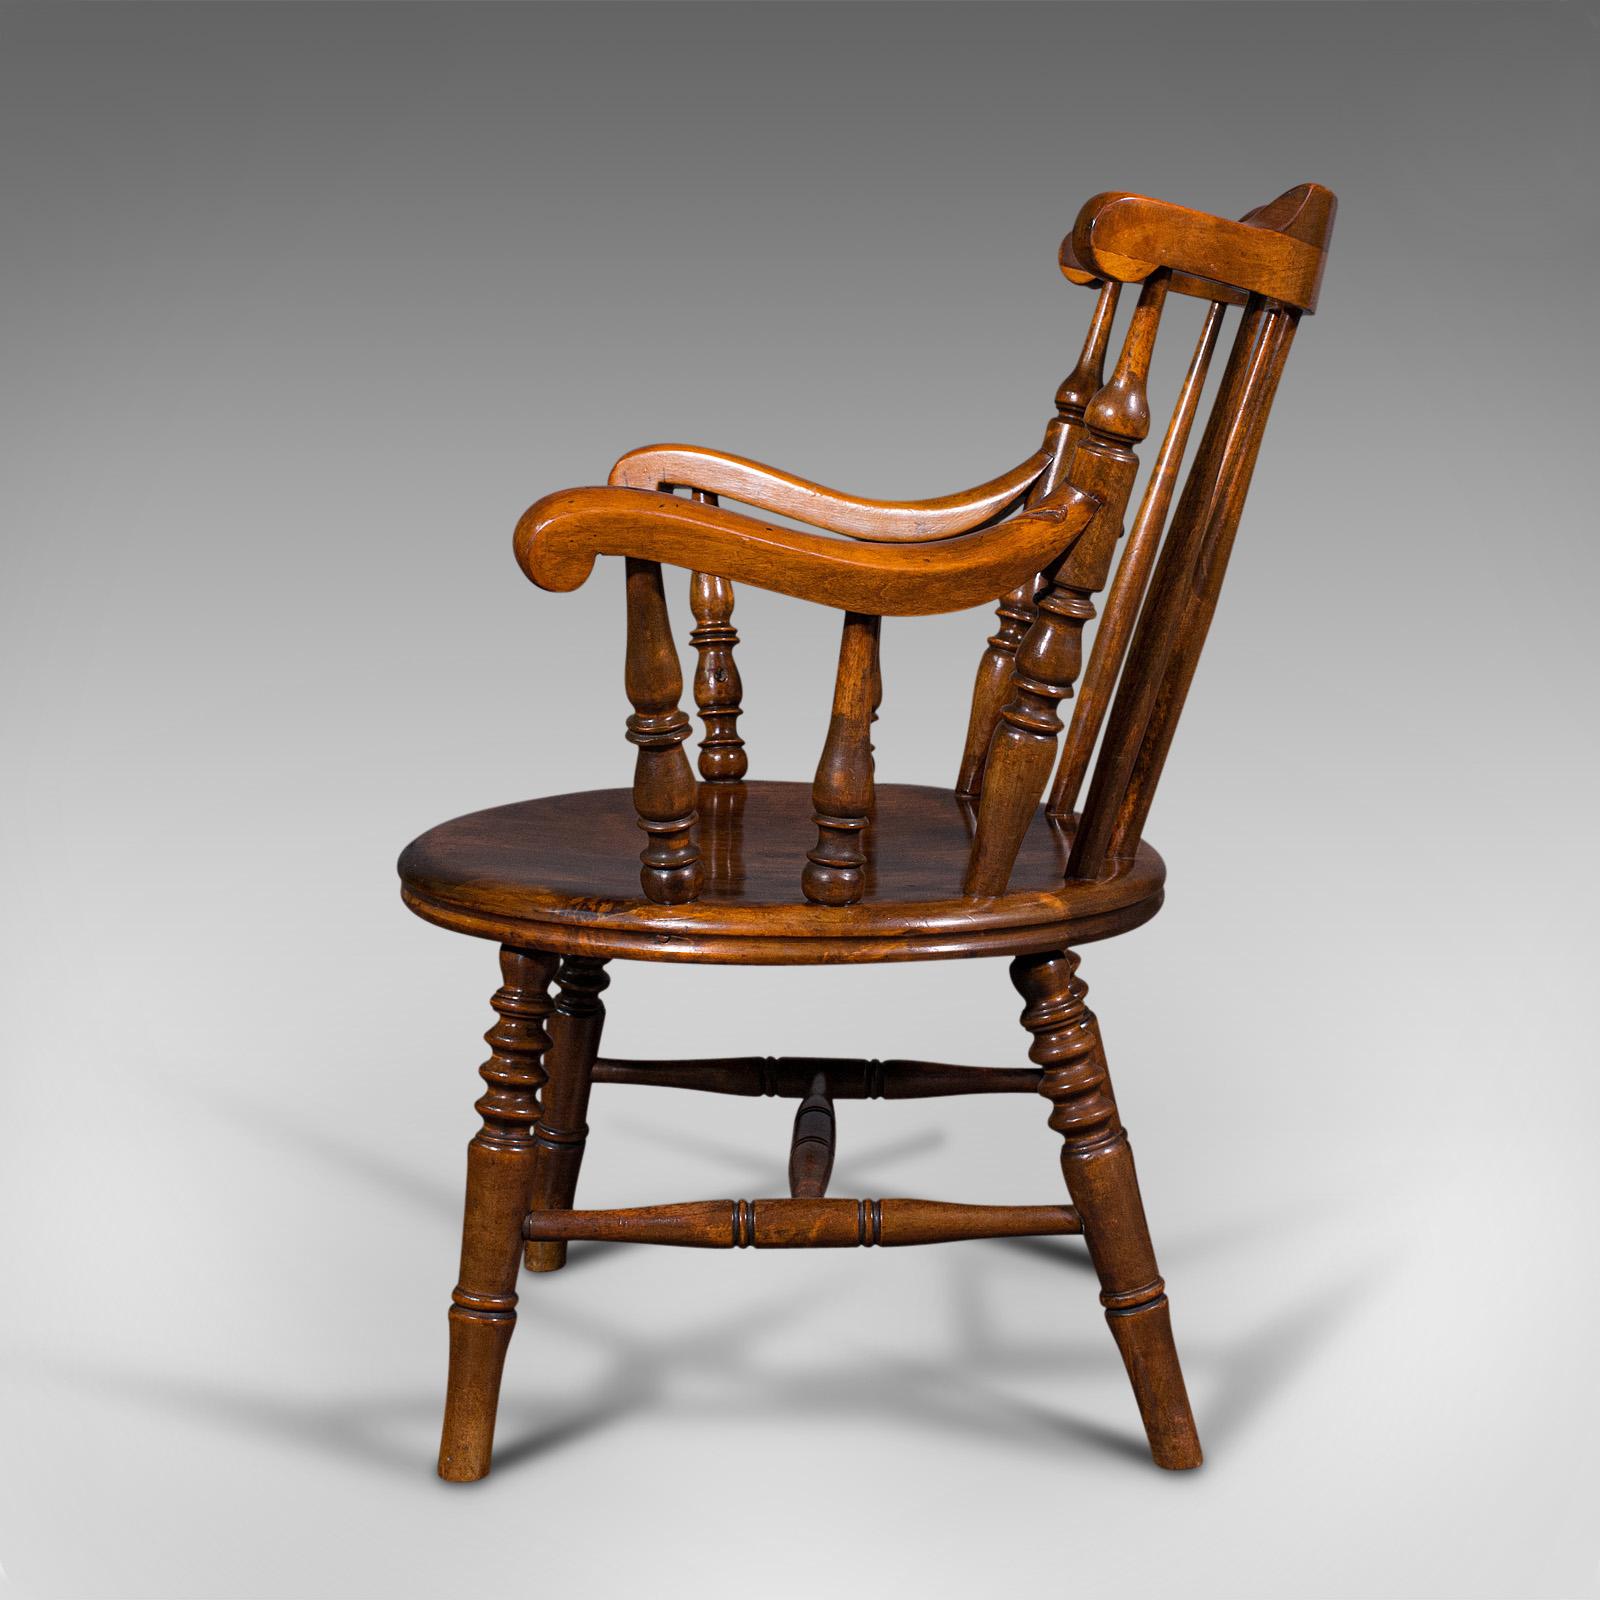 19th Century Antique Fireside Elbow Chair, English, Beech, Occasional Seat, Victorian, C.1890 For Sale